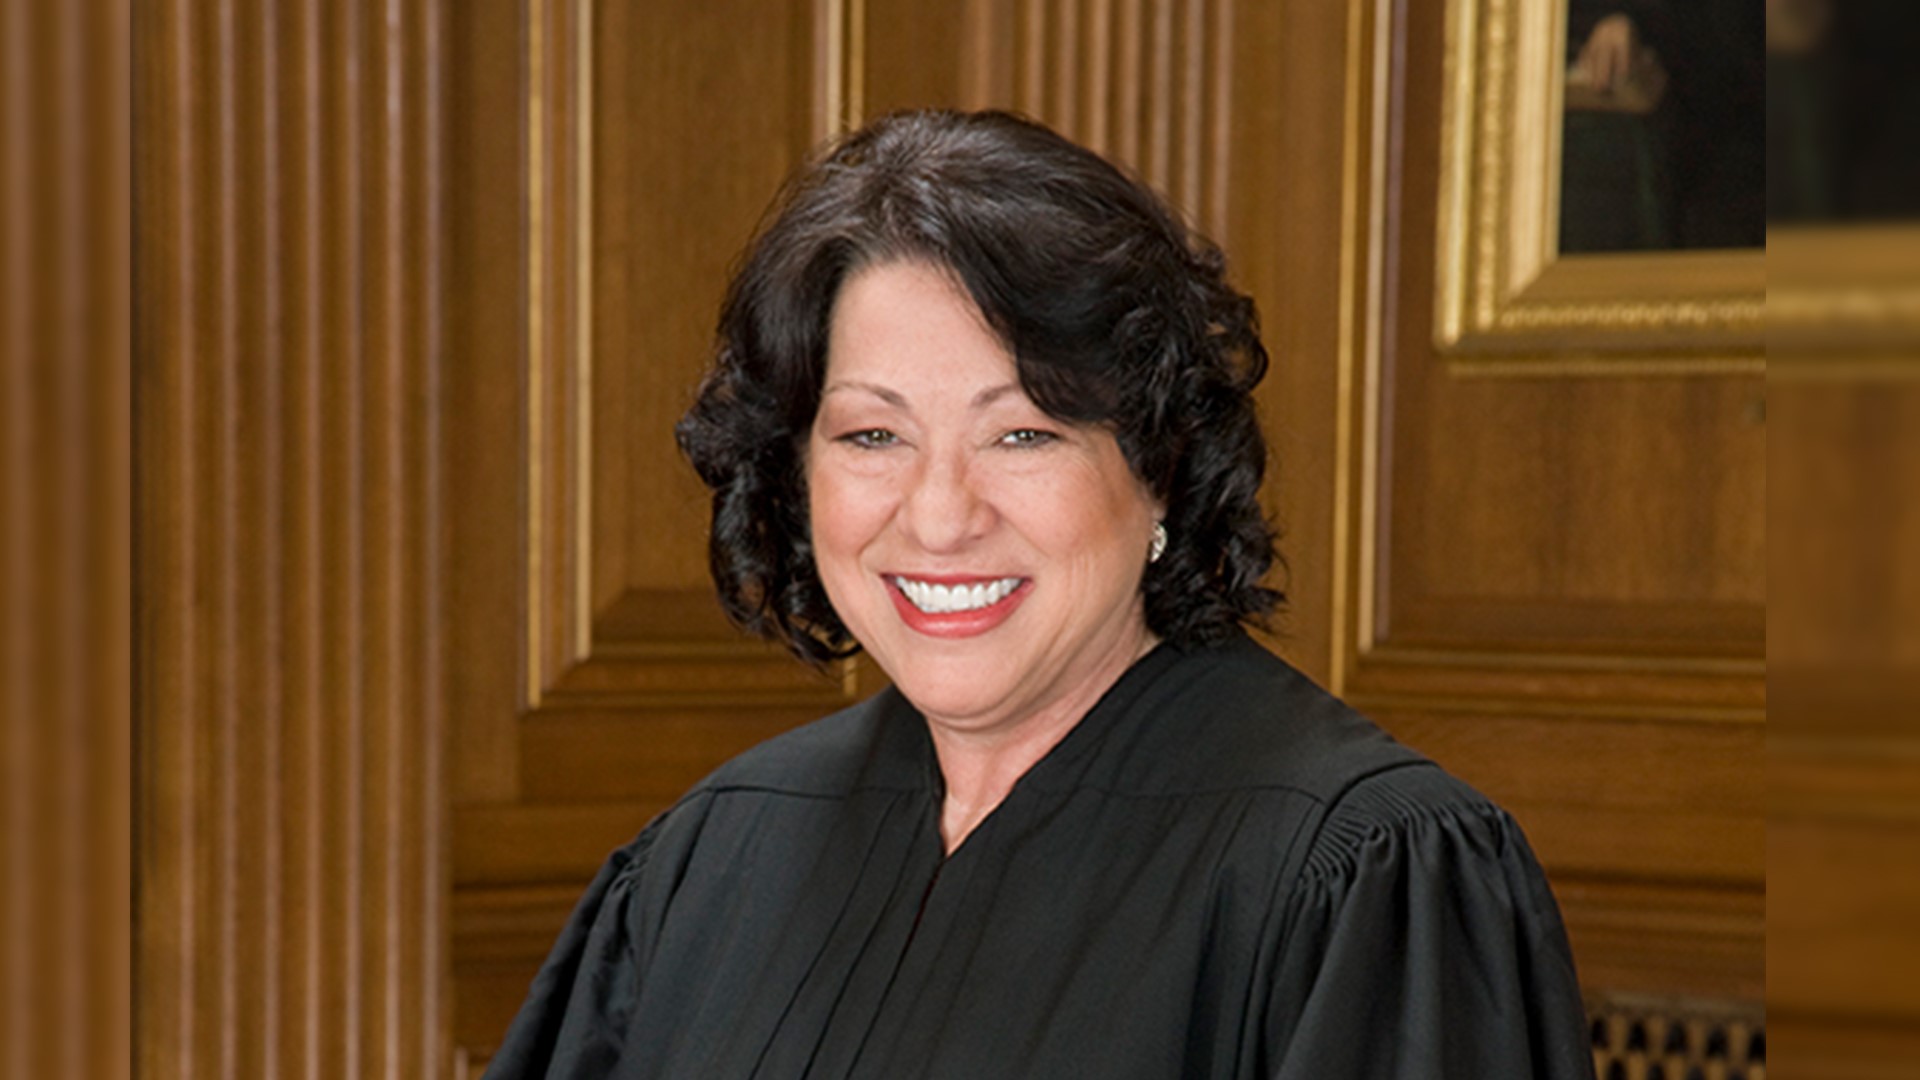 Justice Sotomayor spoke about her life, her work as a jurist and as an author of best-selling children’s books at Crystal Bridges via zoom on Wednesday, March 22.